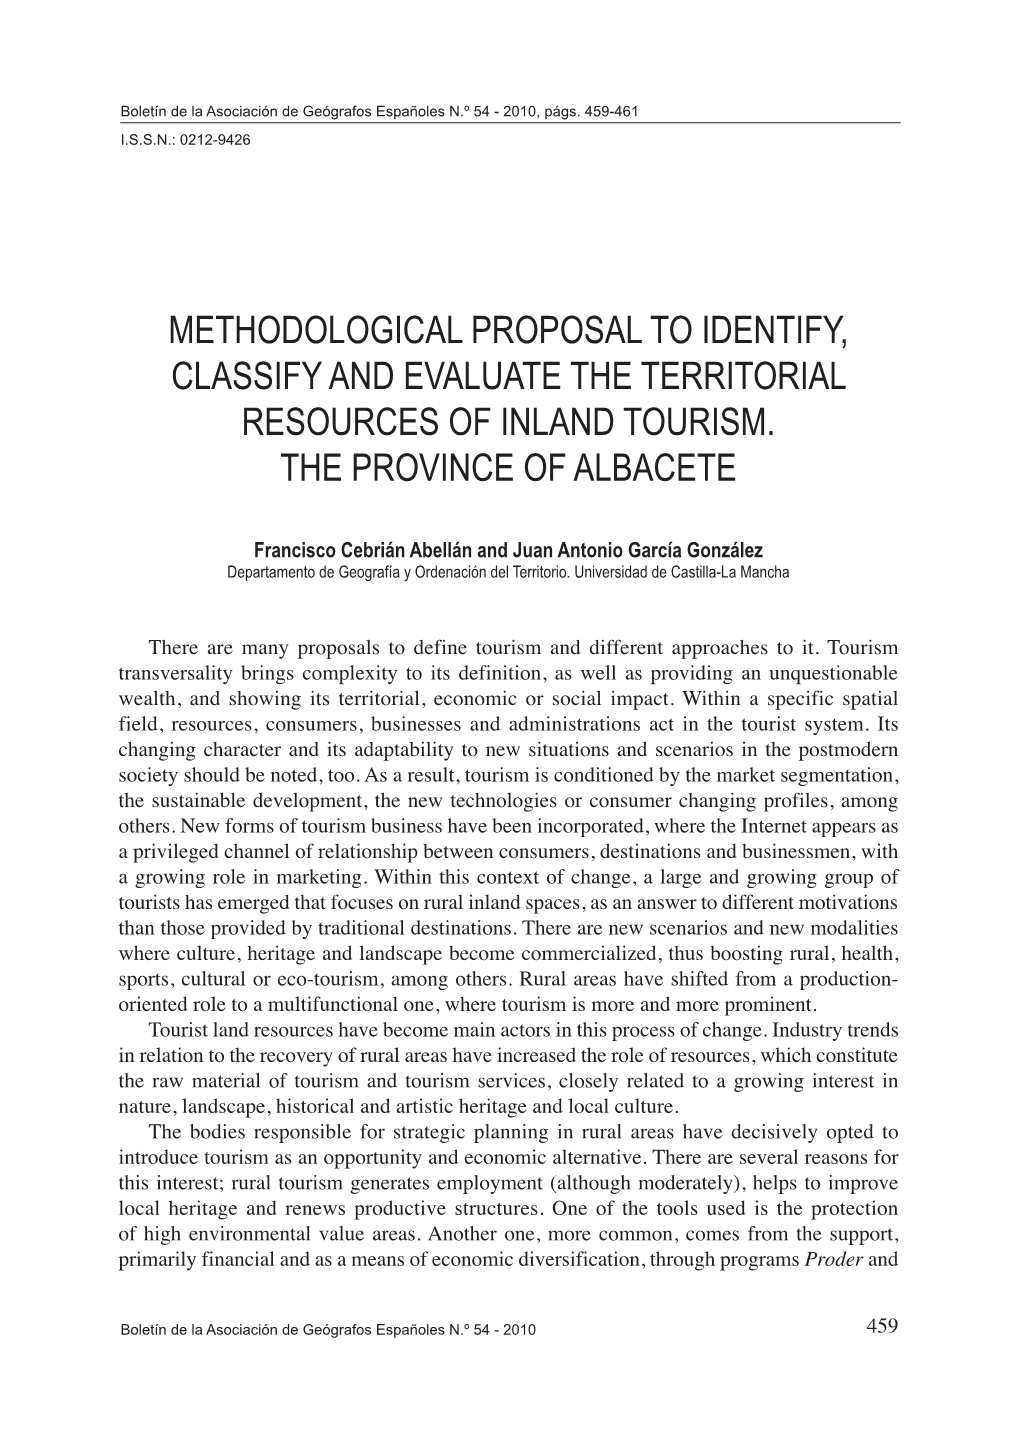 Methodological Proposal to Identify, Classify and Evaluate the Territorial Resources of Inland Tourism